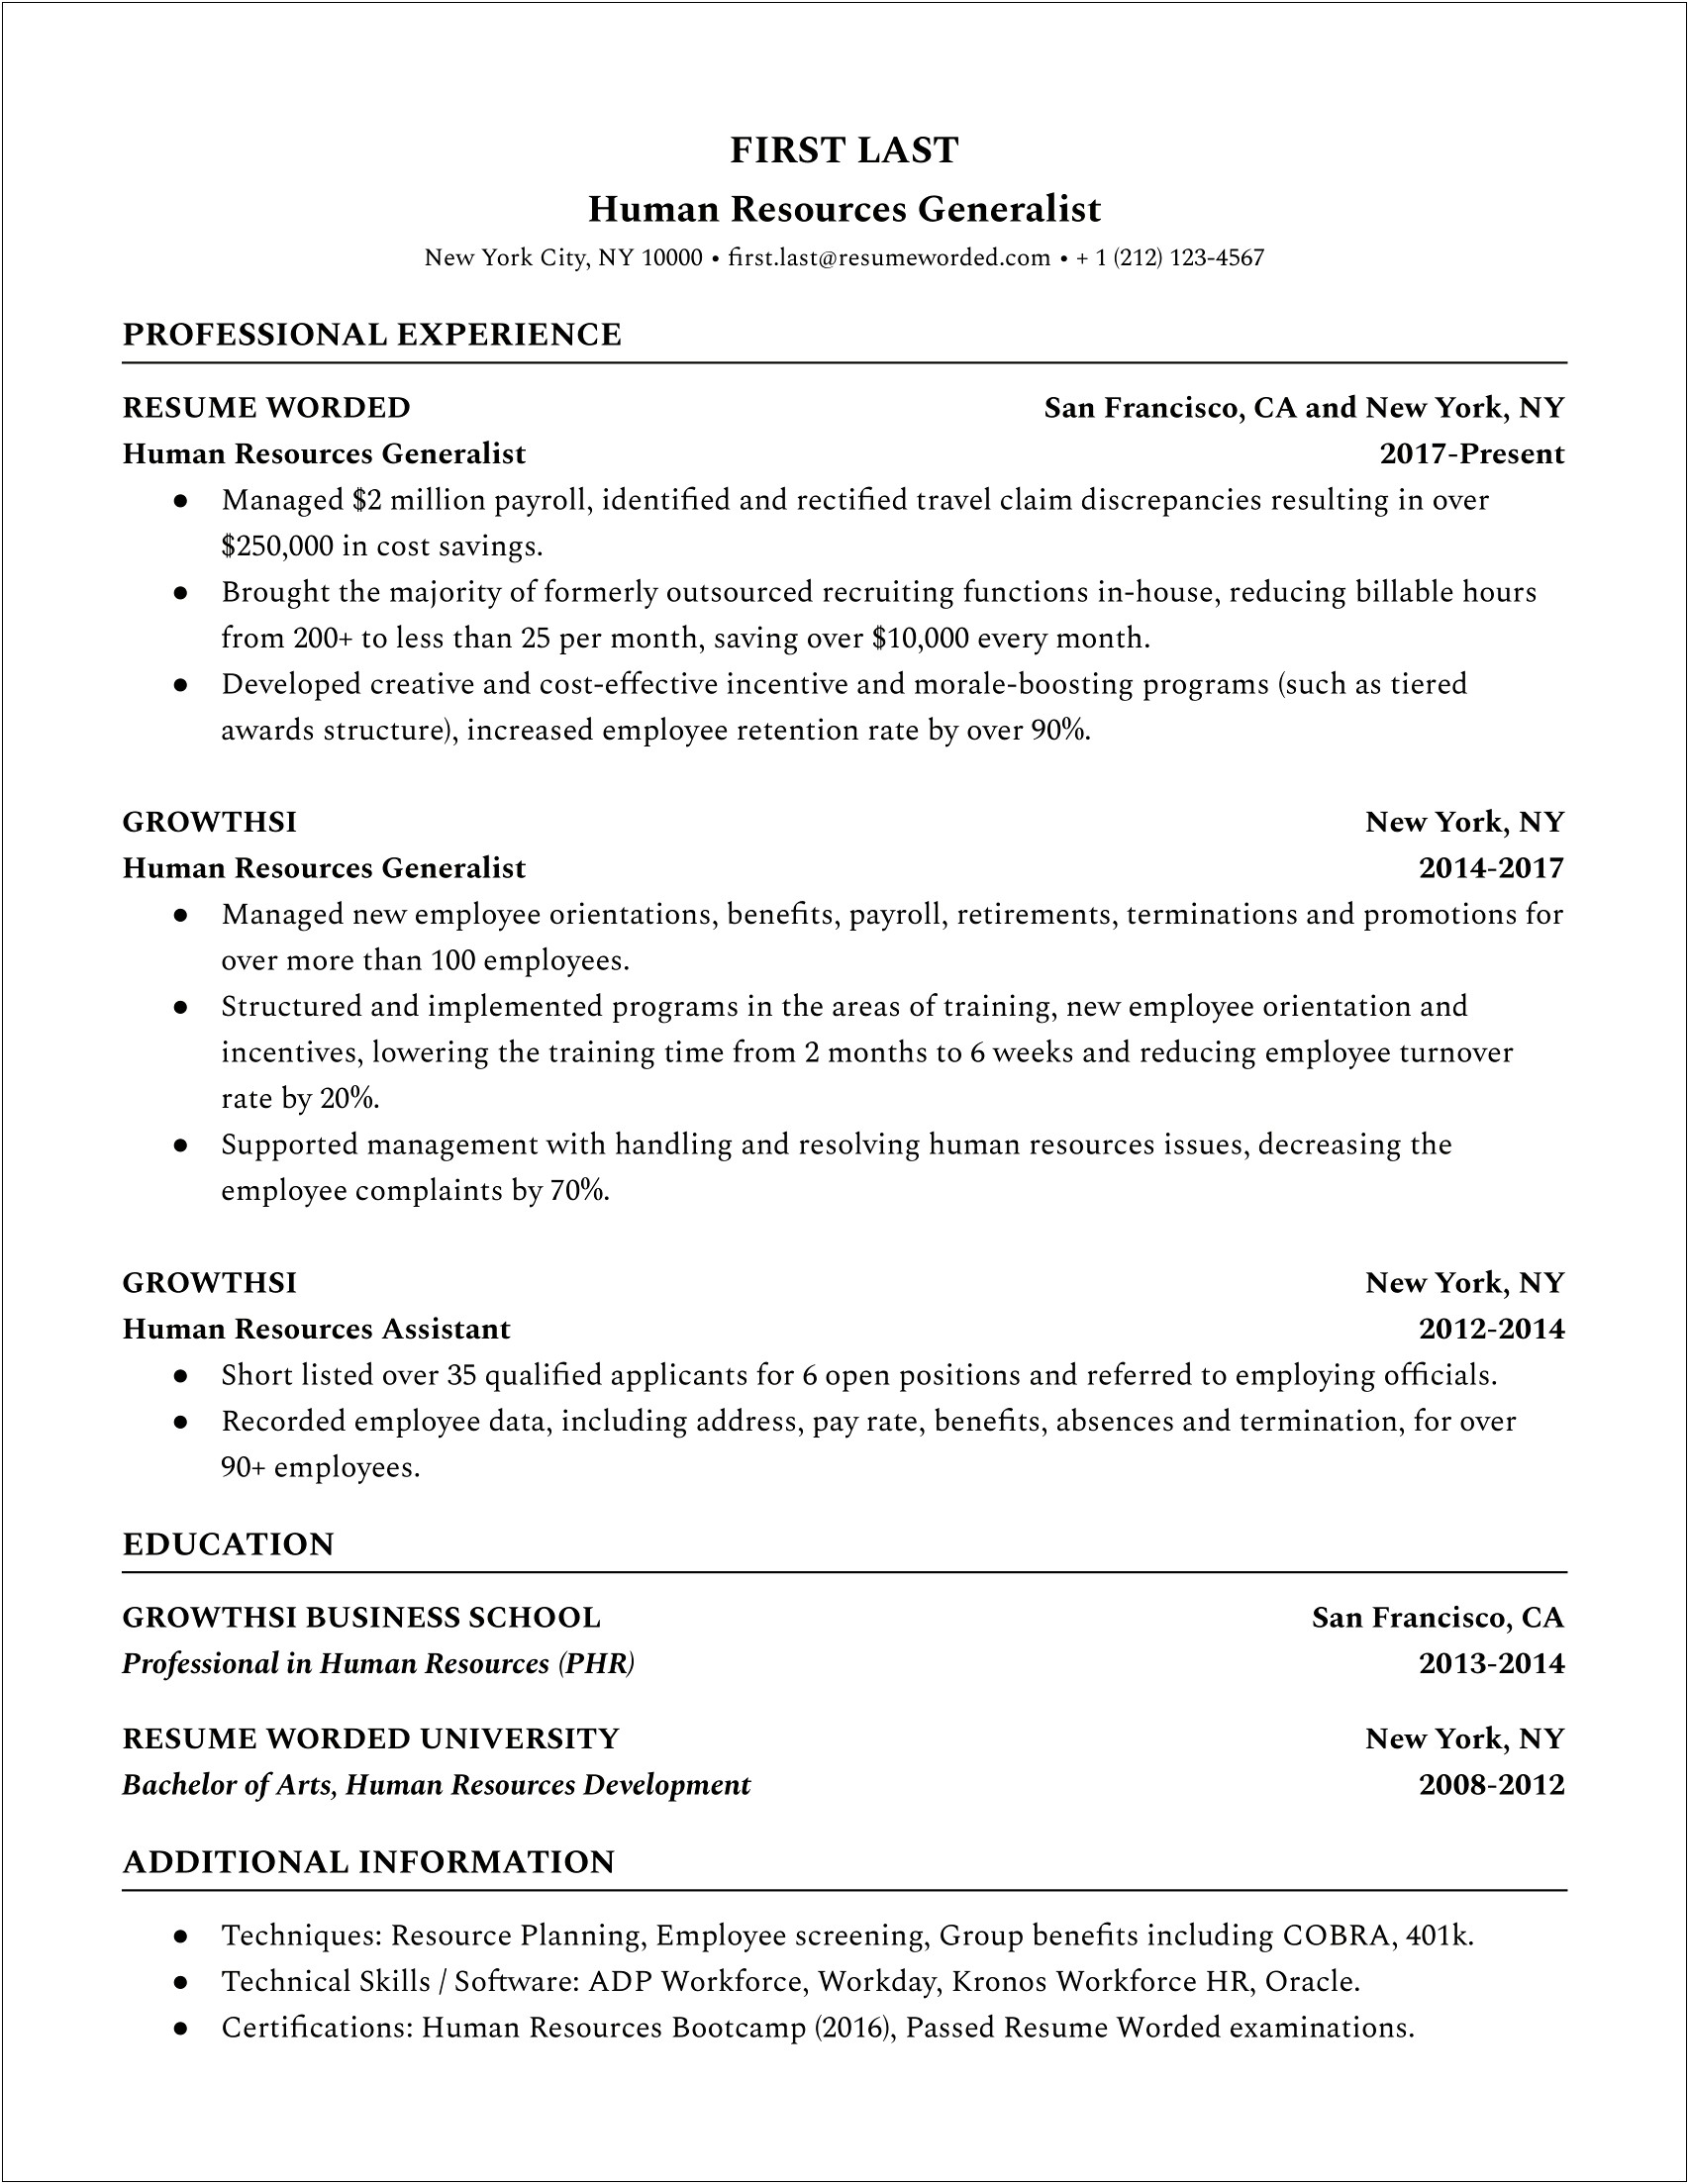 Human Resources Assistant Resume With No Experience